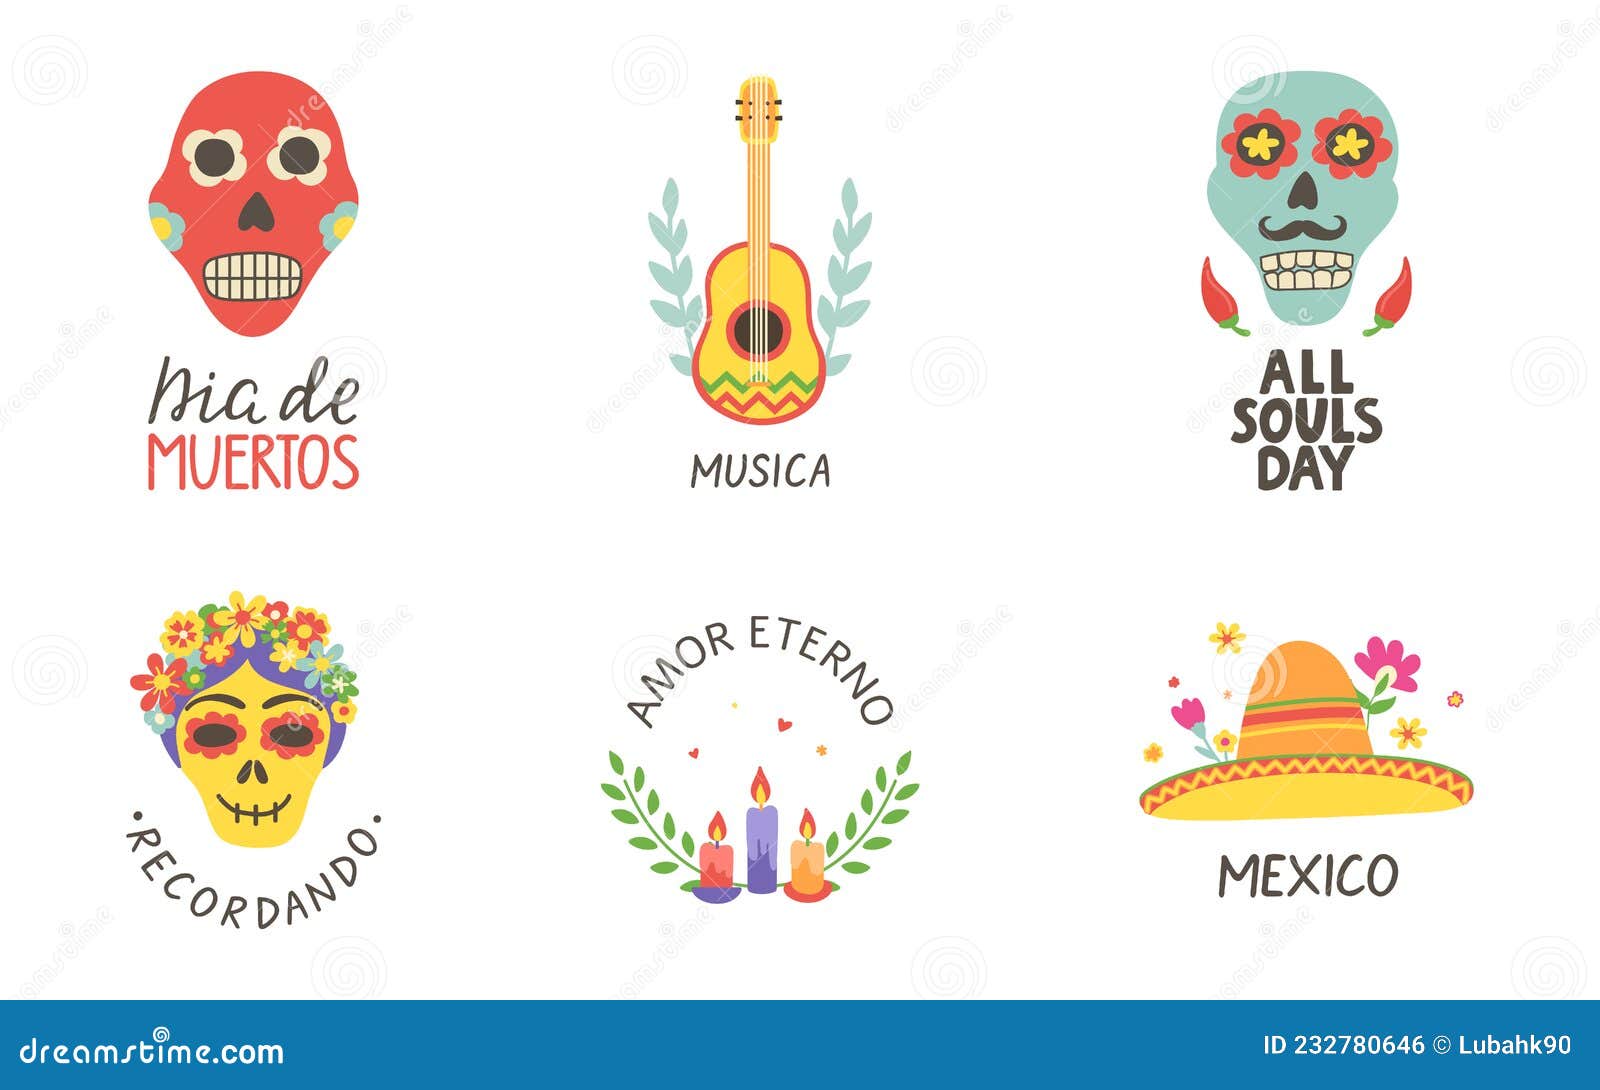 day of the dead cards set. dia de muertos hand lettering with skull print. mexico icon with sombrero and flowers